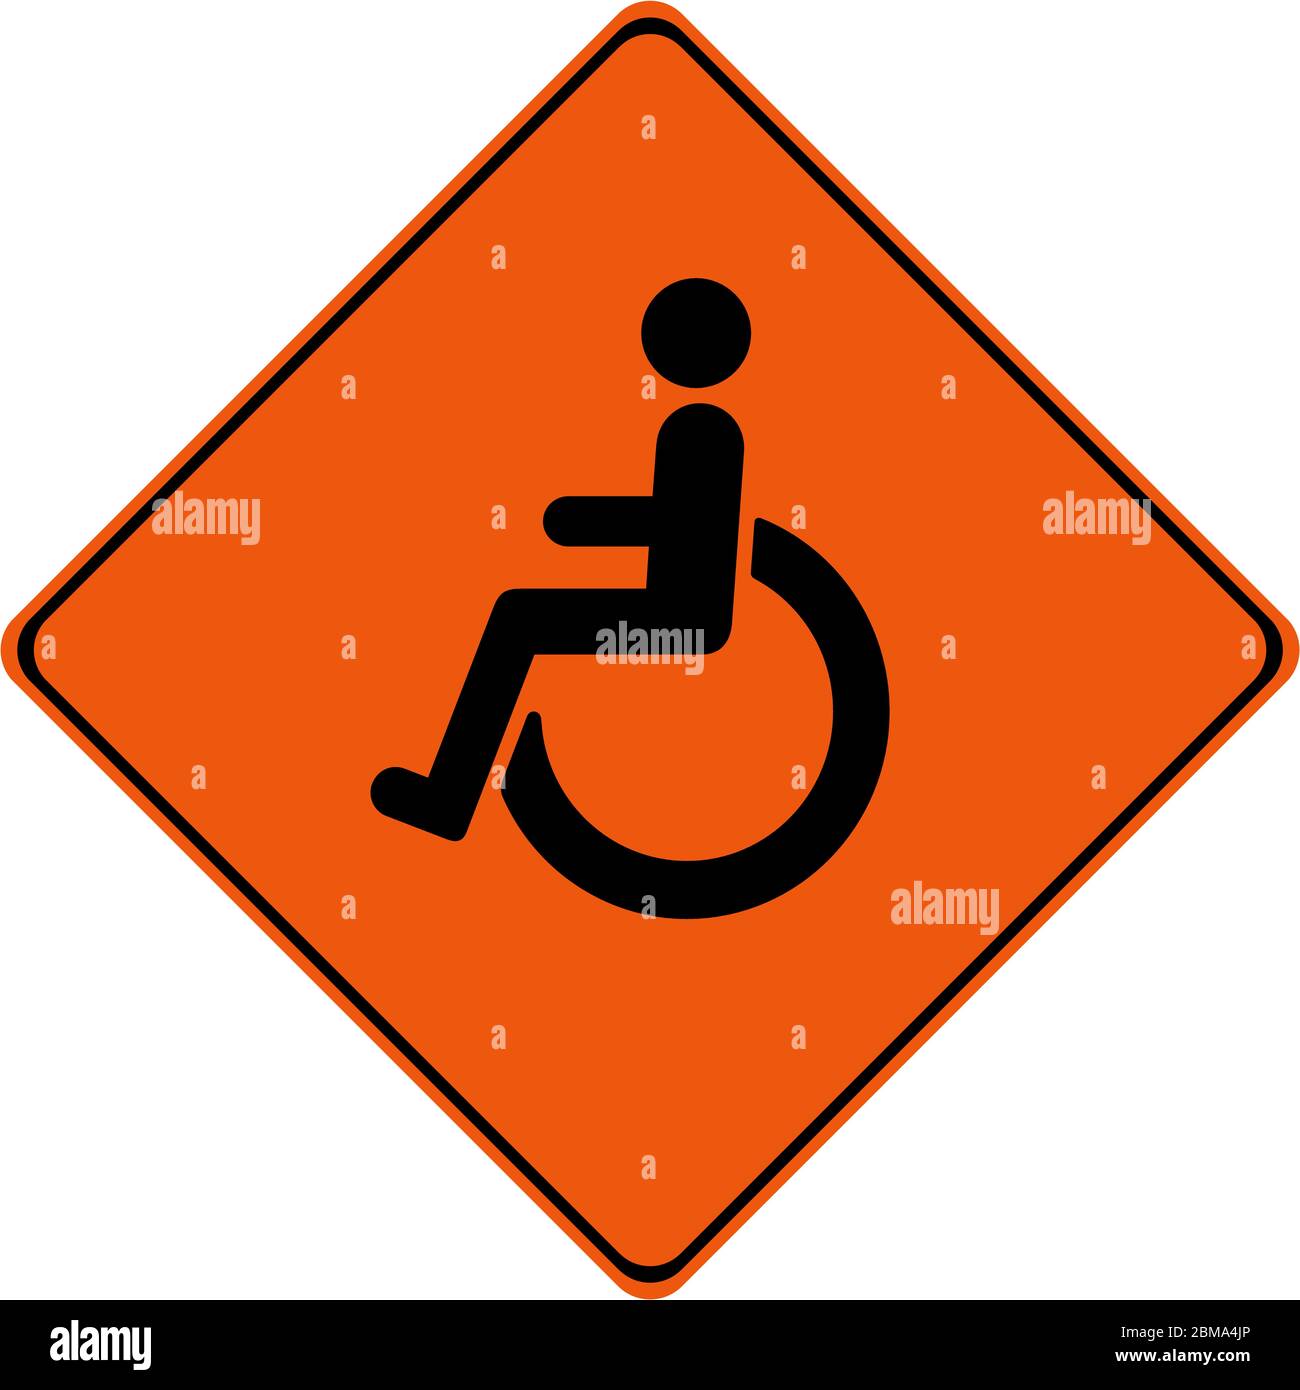 Warning sign with disabled people symbol Stock Photo